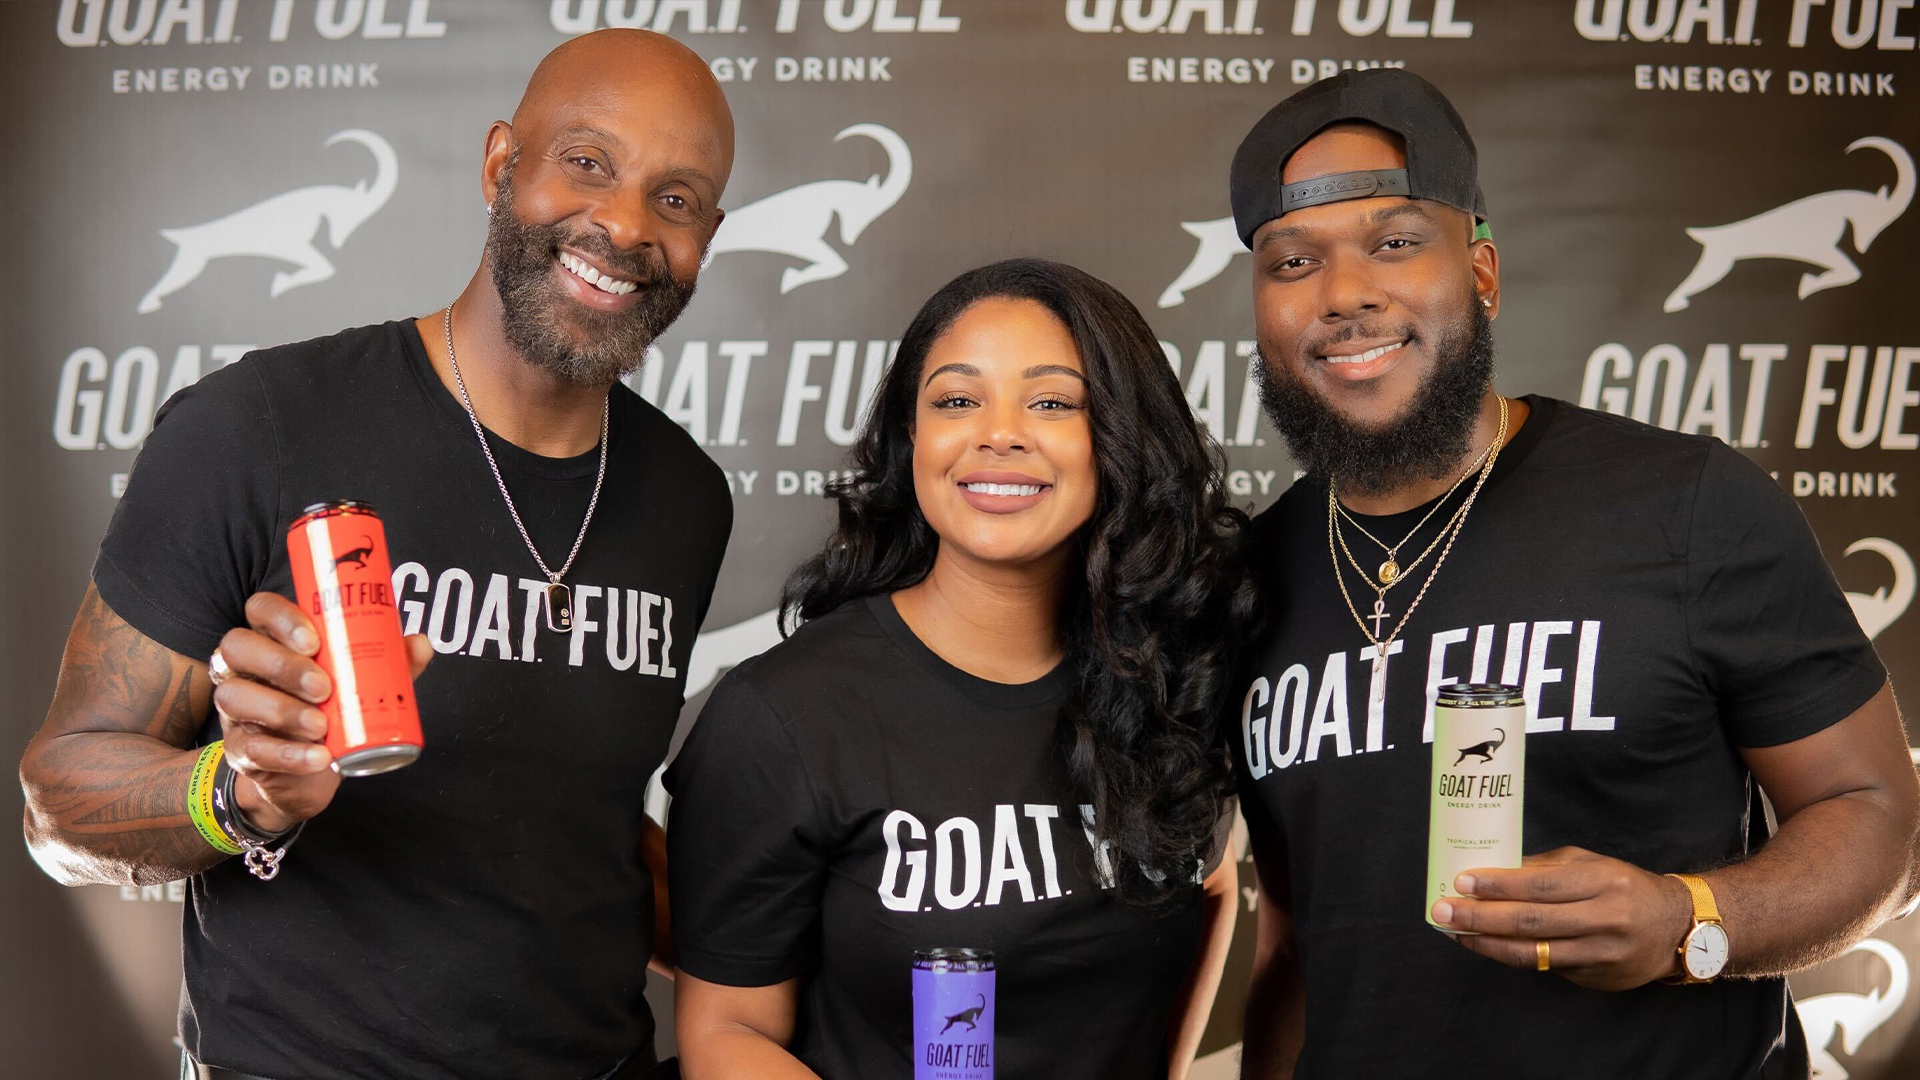 Jaqui Rice Gold Says Having Her Dad Jerry Rice As A G.O.A.T. Fuel Co-Founder Opened Doors, But Raising $12M And Inking An NBA Partnership Was Rooted In 'Great Business'